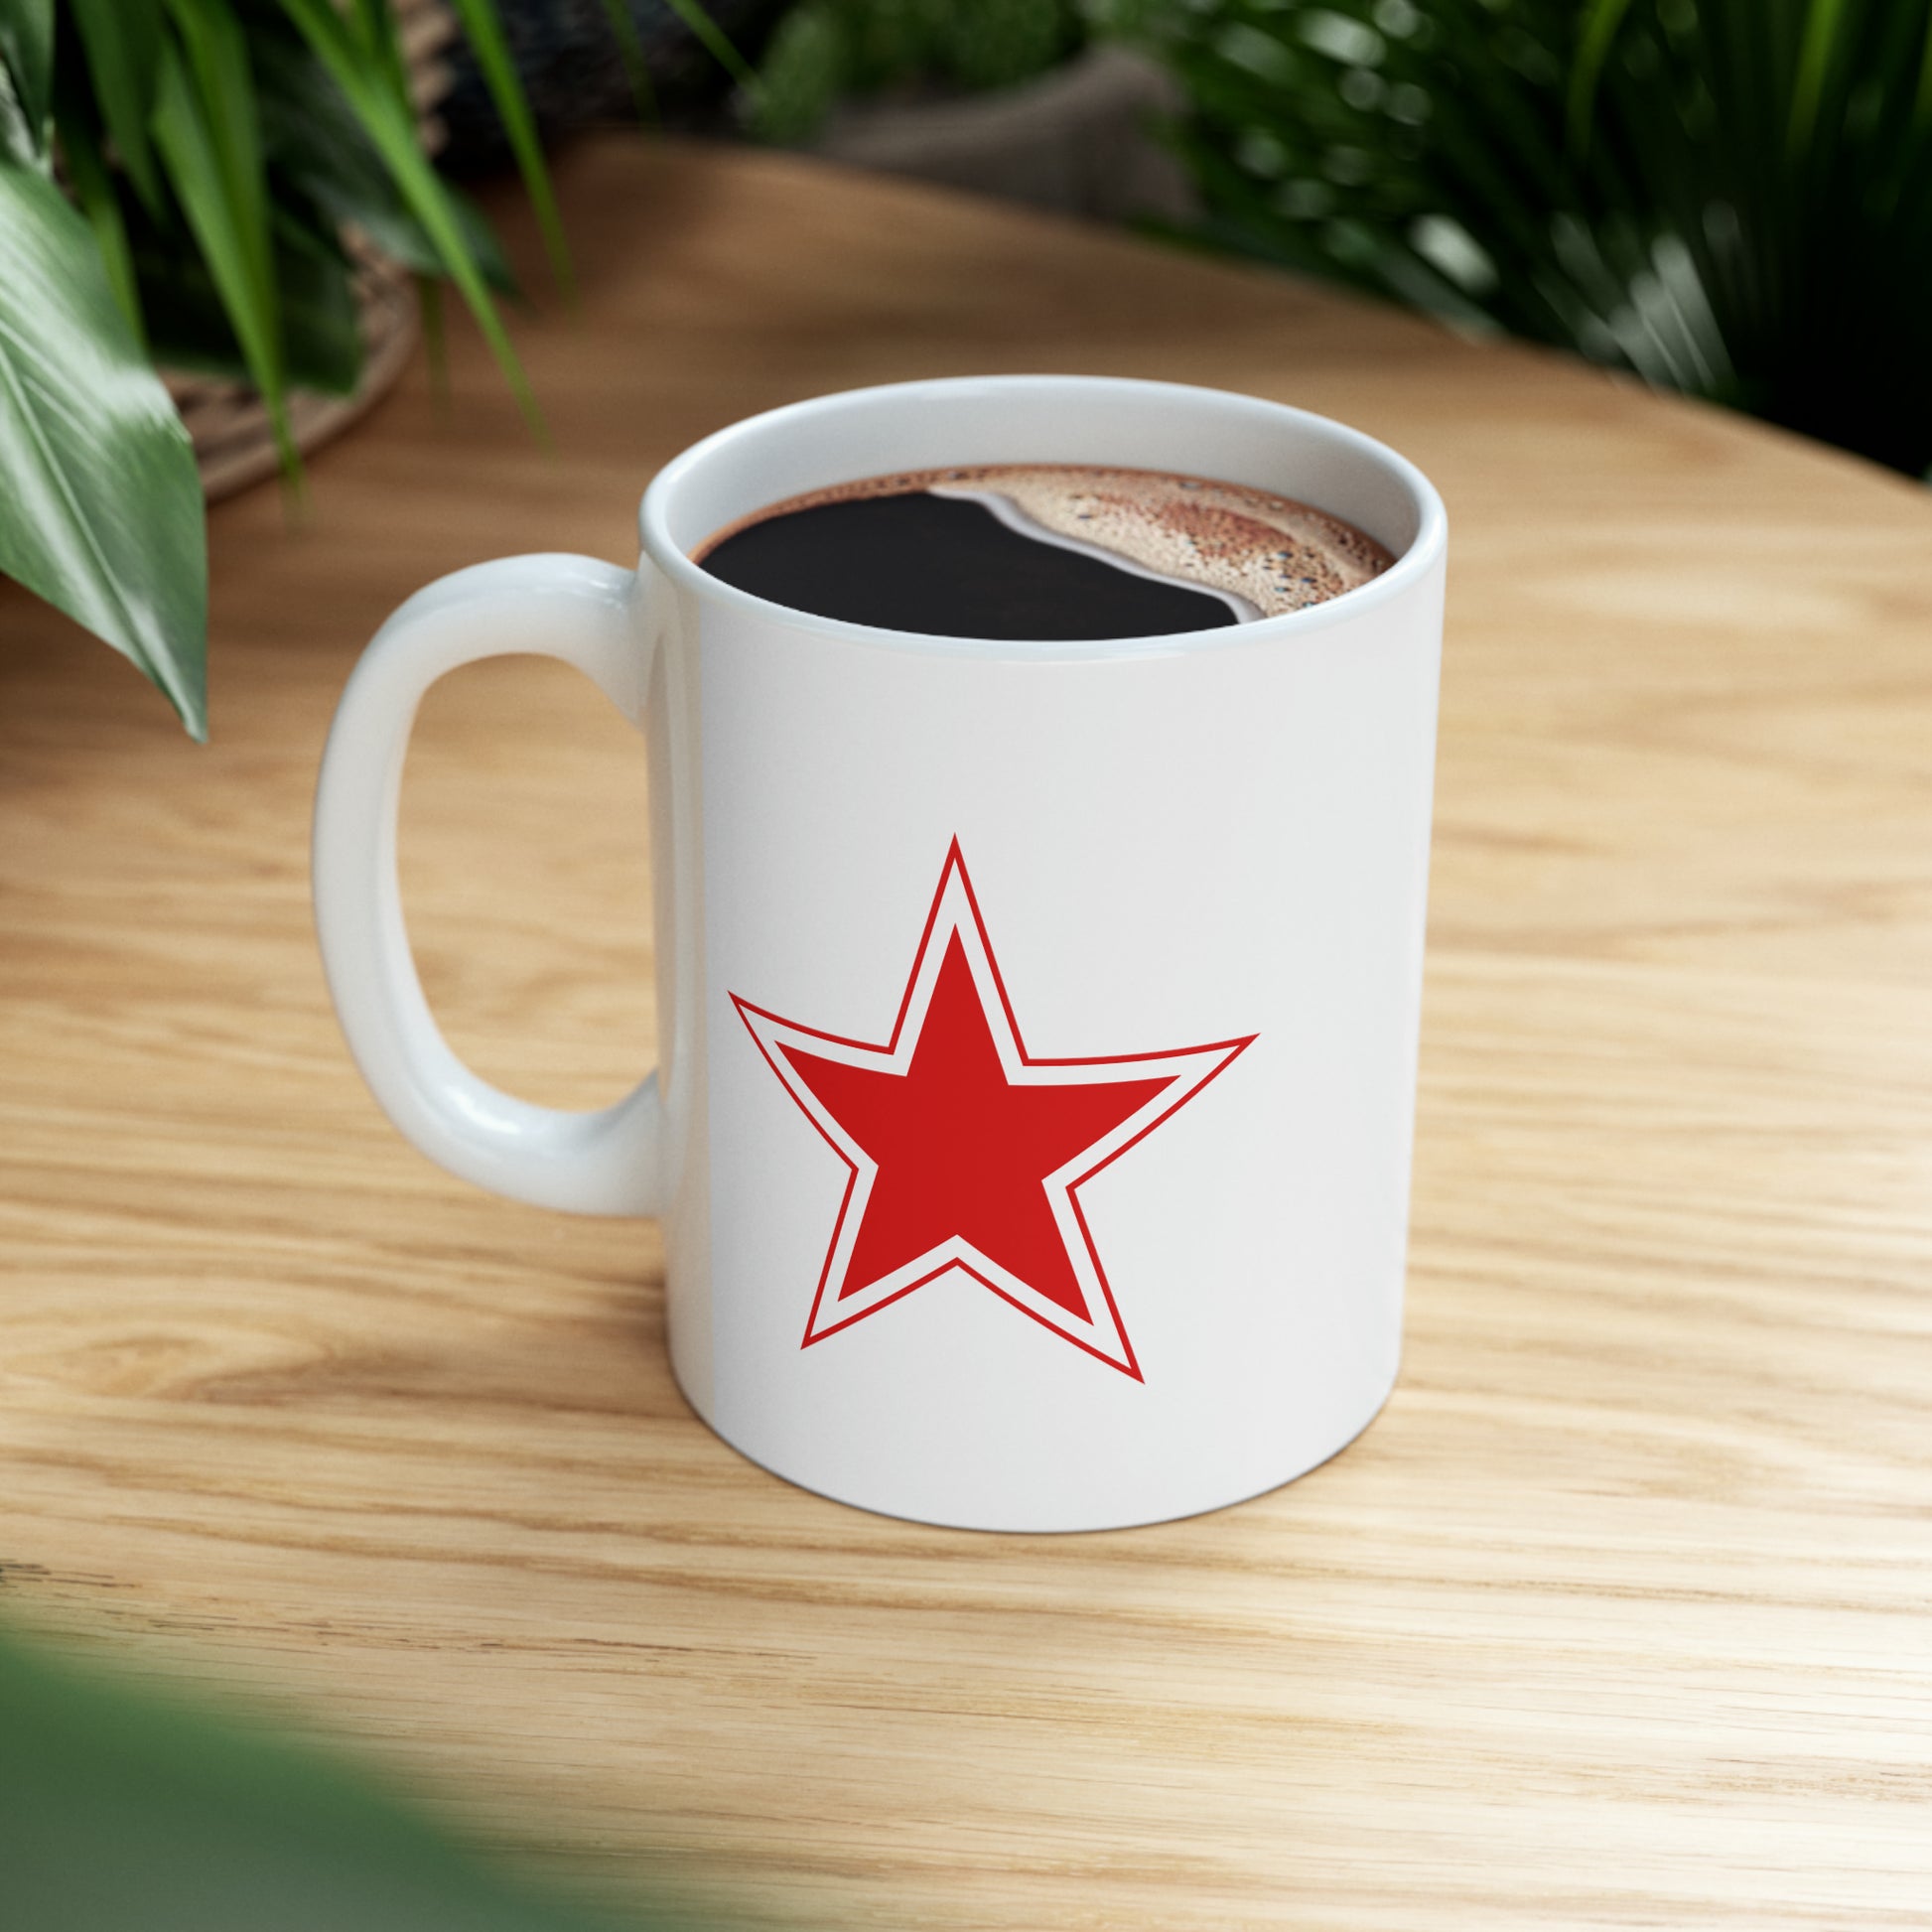 Russian Air Force Roundel Coffee Mug - Double Sided White Ceramic 11oz - By TheGlassyLass.com